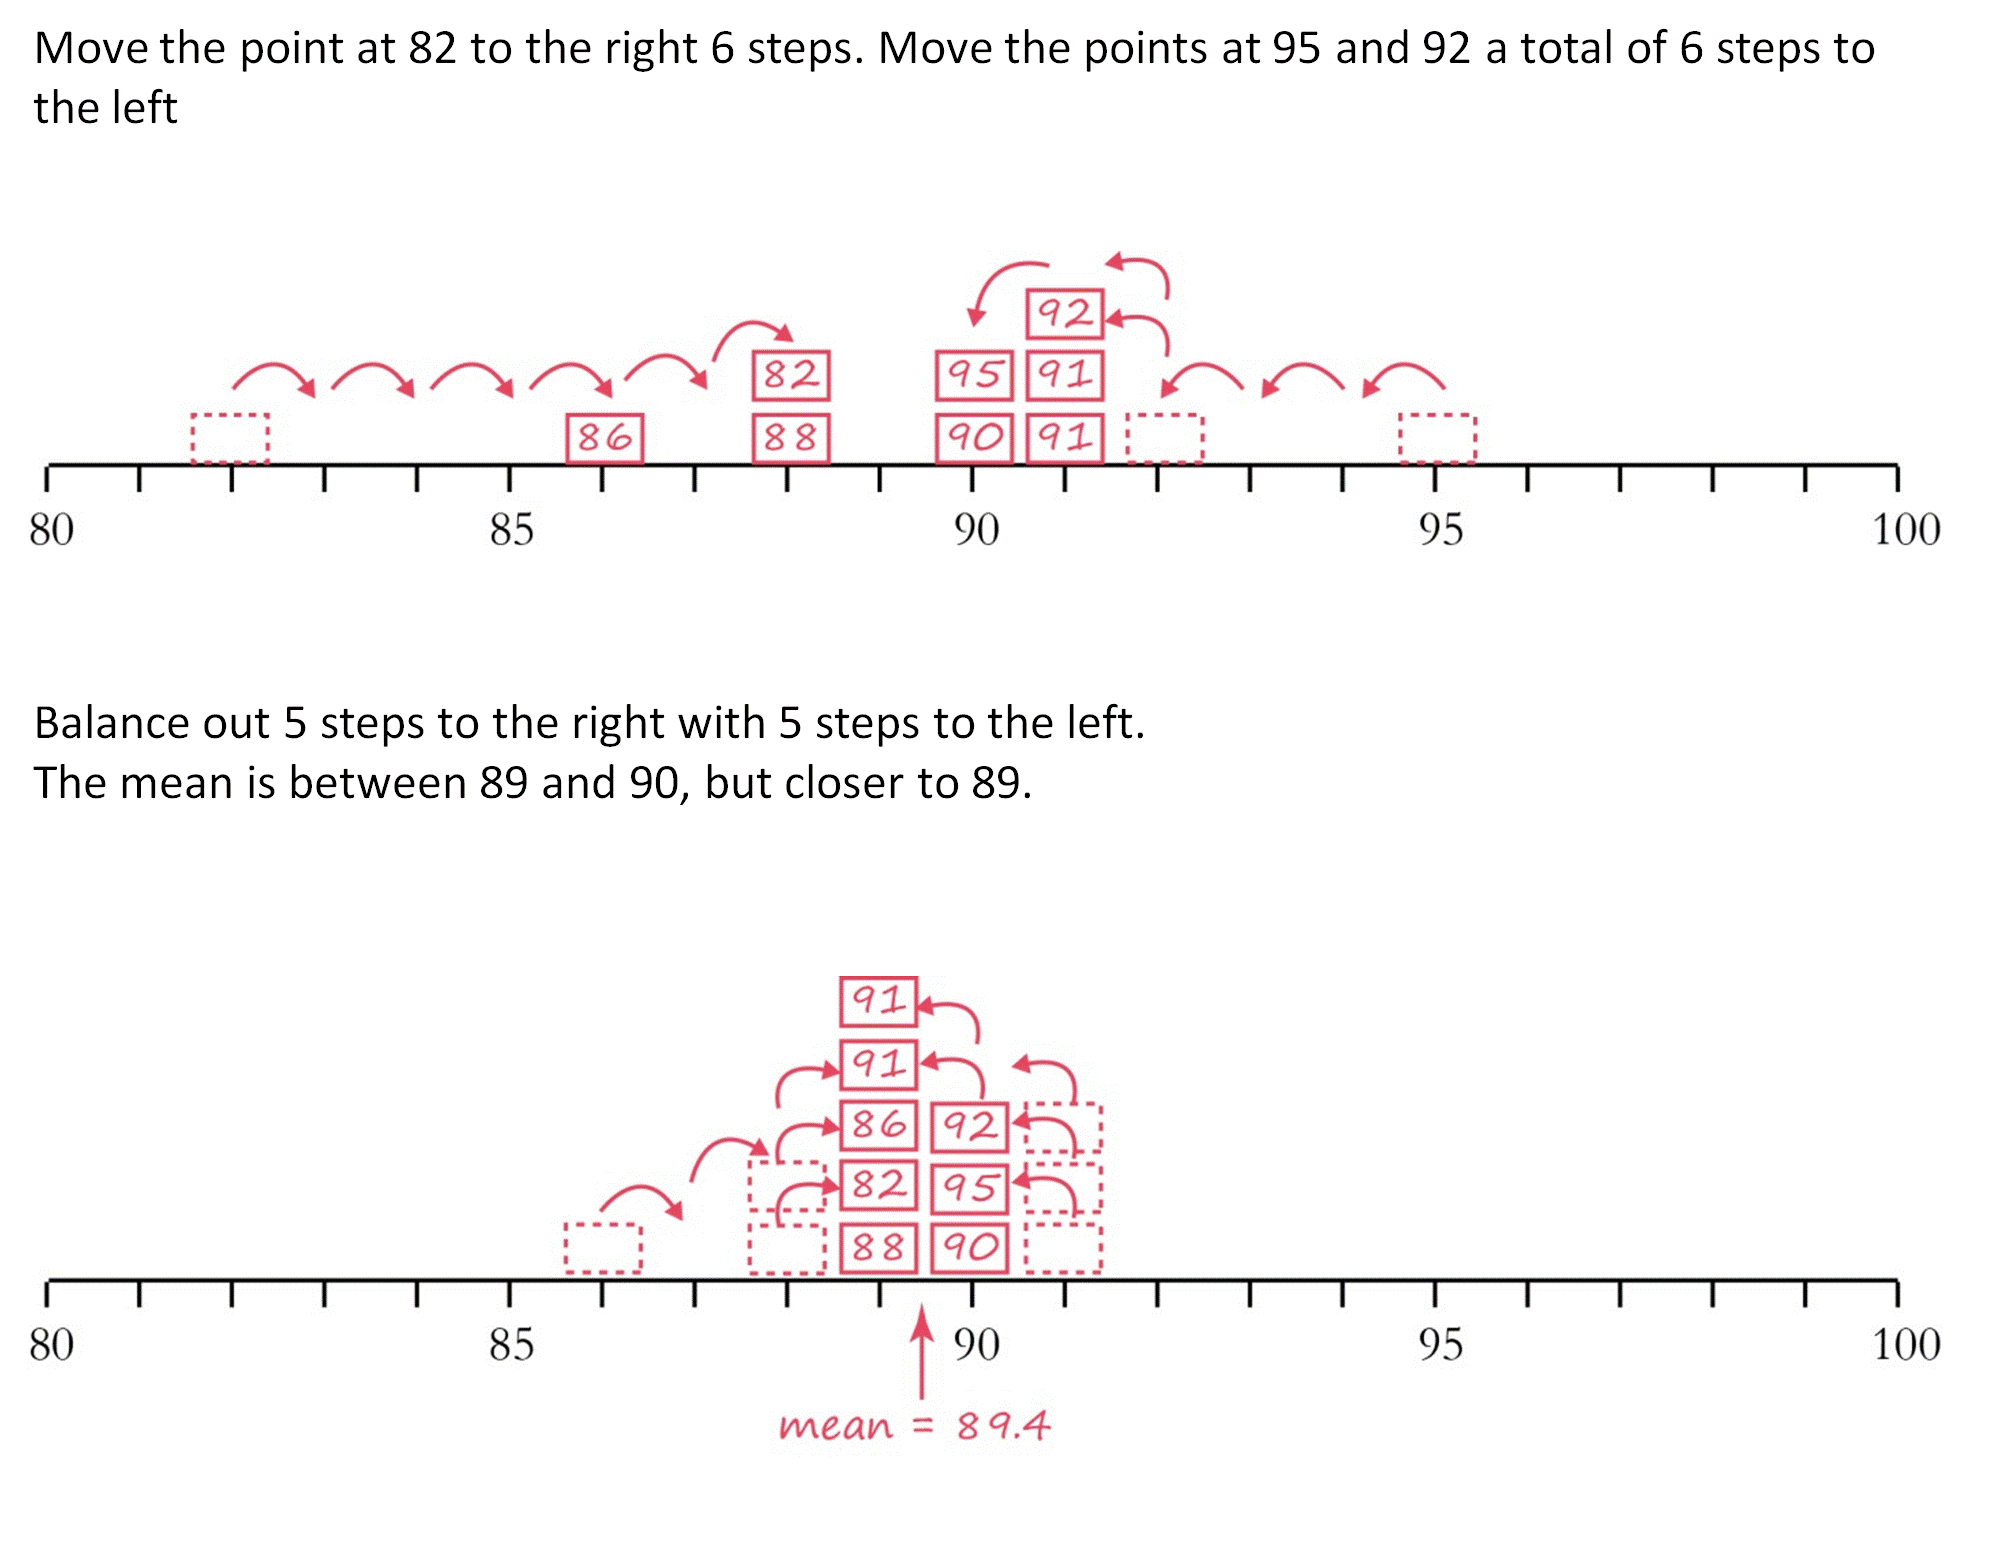 Line plot of data points, illustrating how to move the point at 82 to the right 6 steps and the 95 and 92 to the left a total of 6 steps, to consolidate the data. Moving data points further to the center is then show, resulting in 5 data points stacked above 89 and 3 stacked about 90, to show a mean of 89.4.